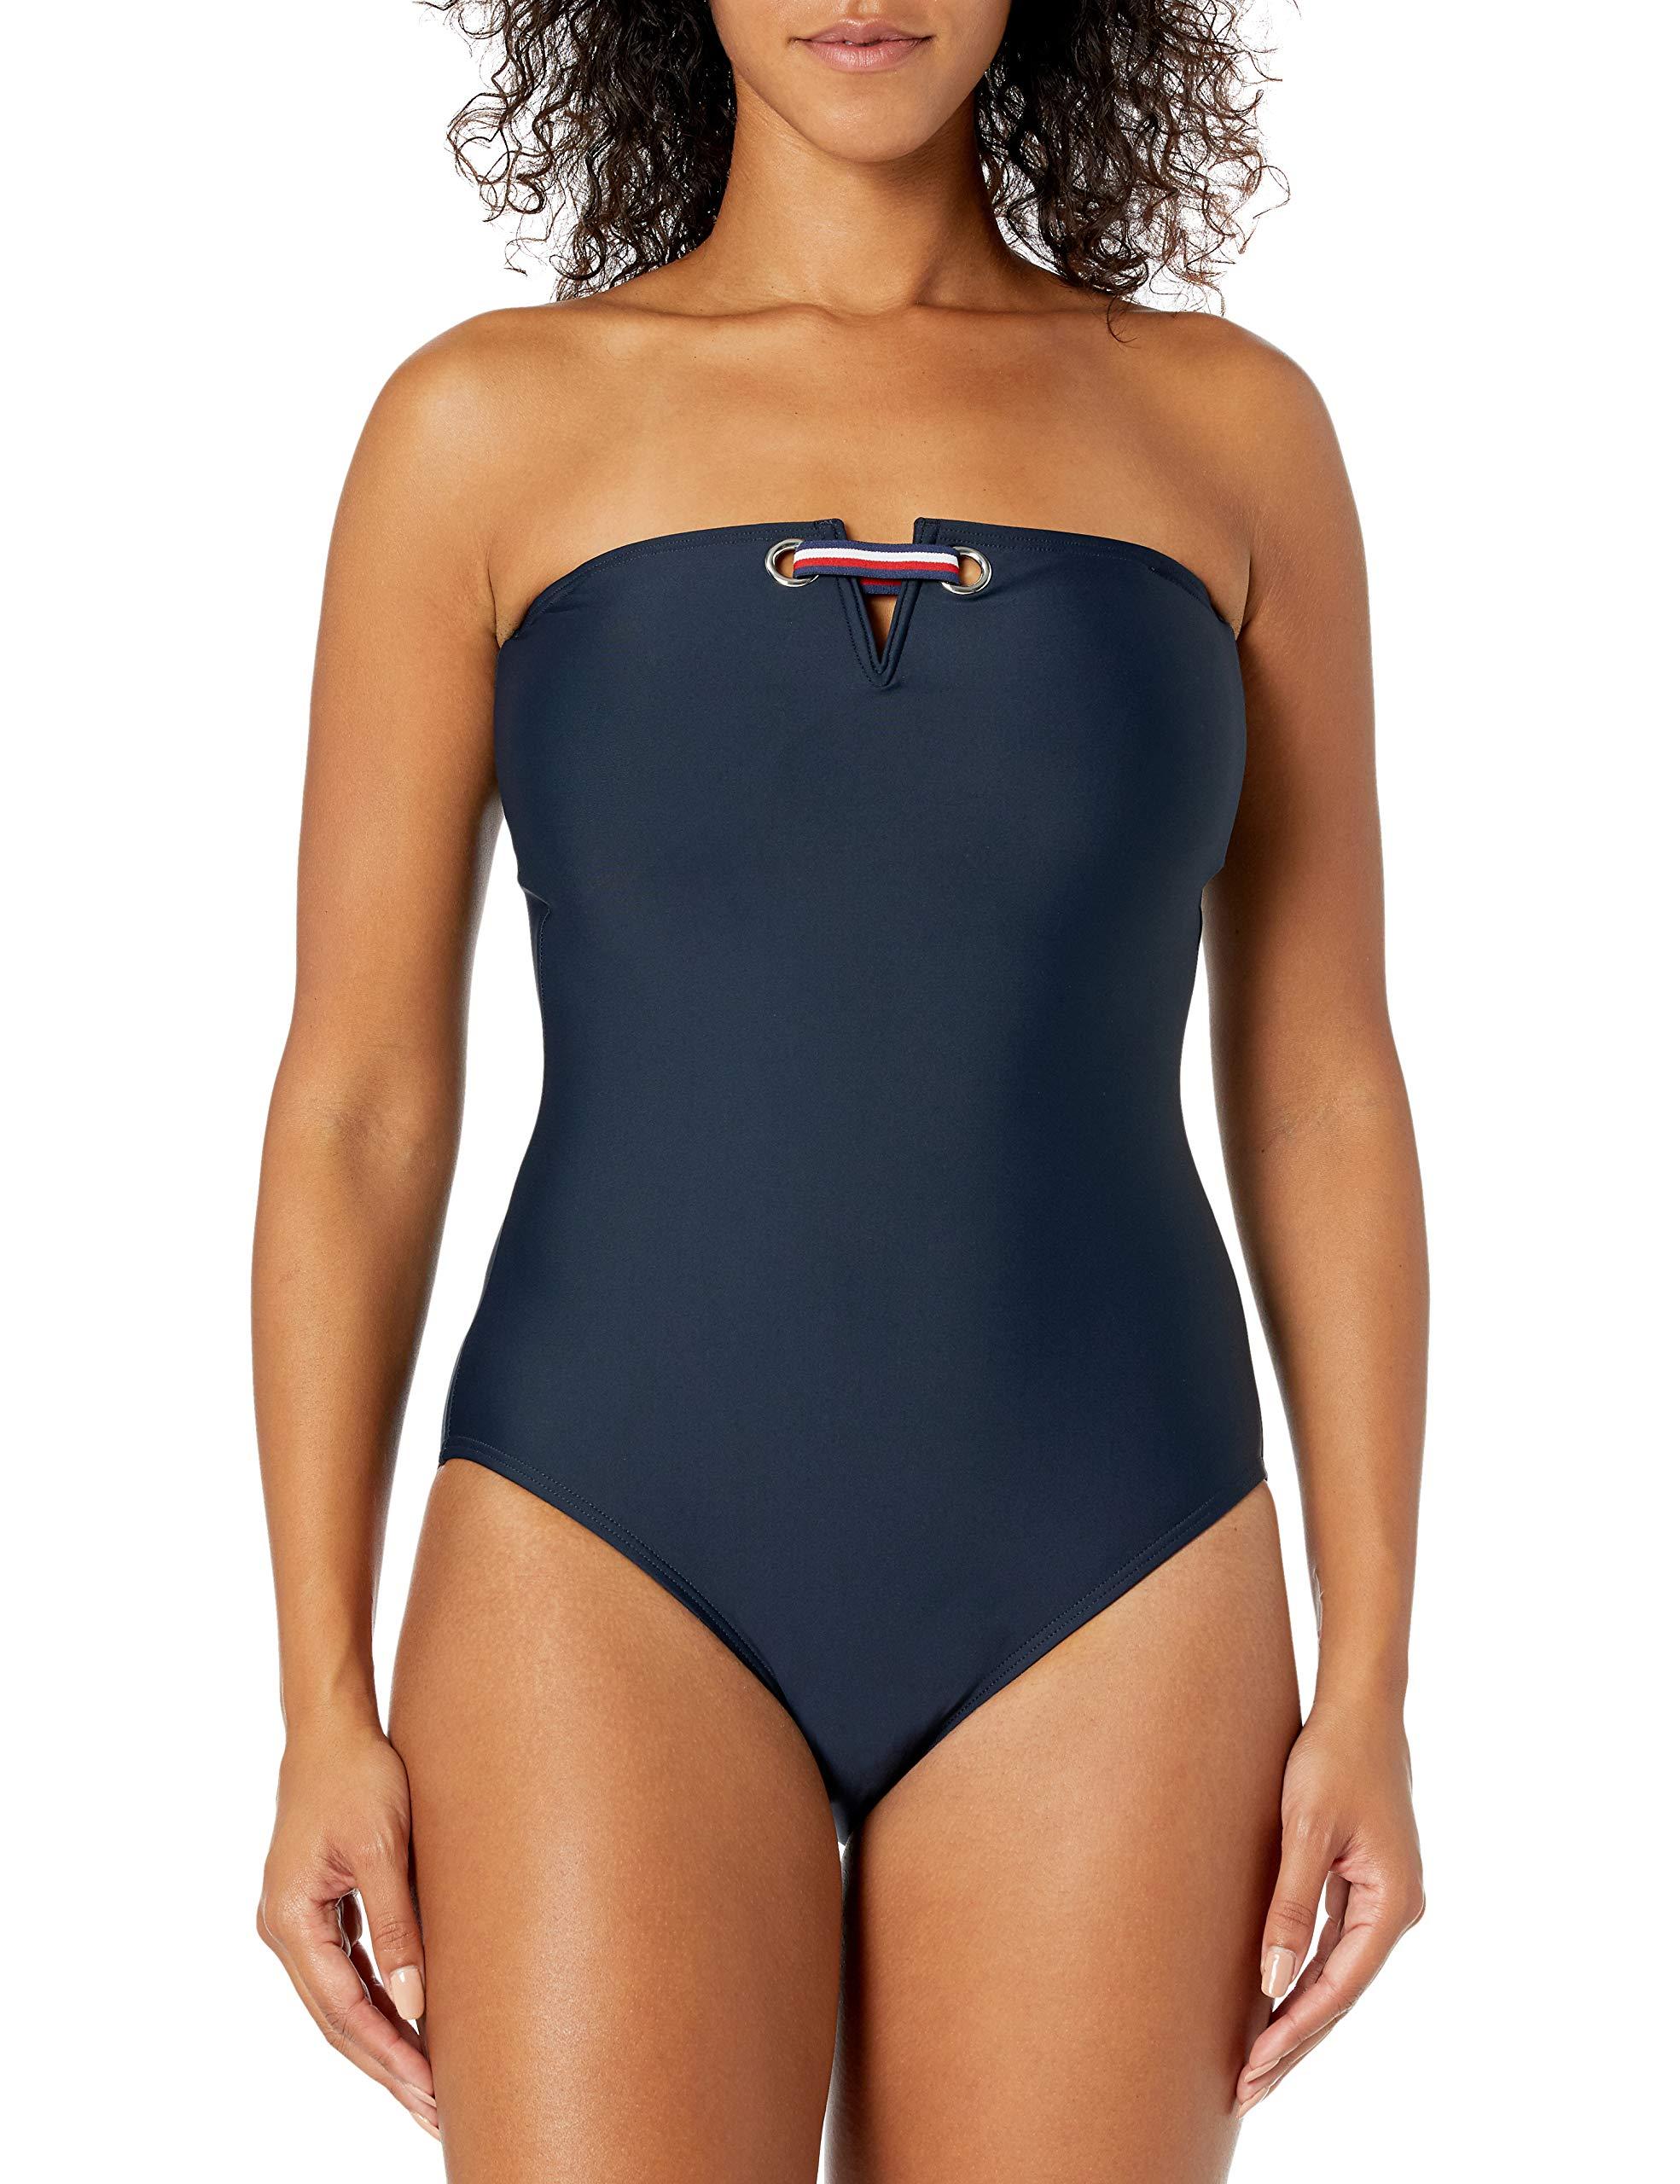 Tommy Hilfiger Solid Tommy Tape Bandeau One Piece Swimsuit in Navy (Blue) -  Save 60% - Lyst